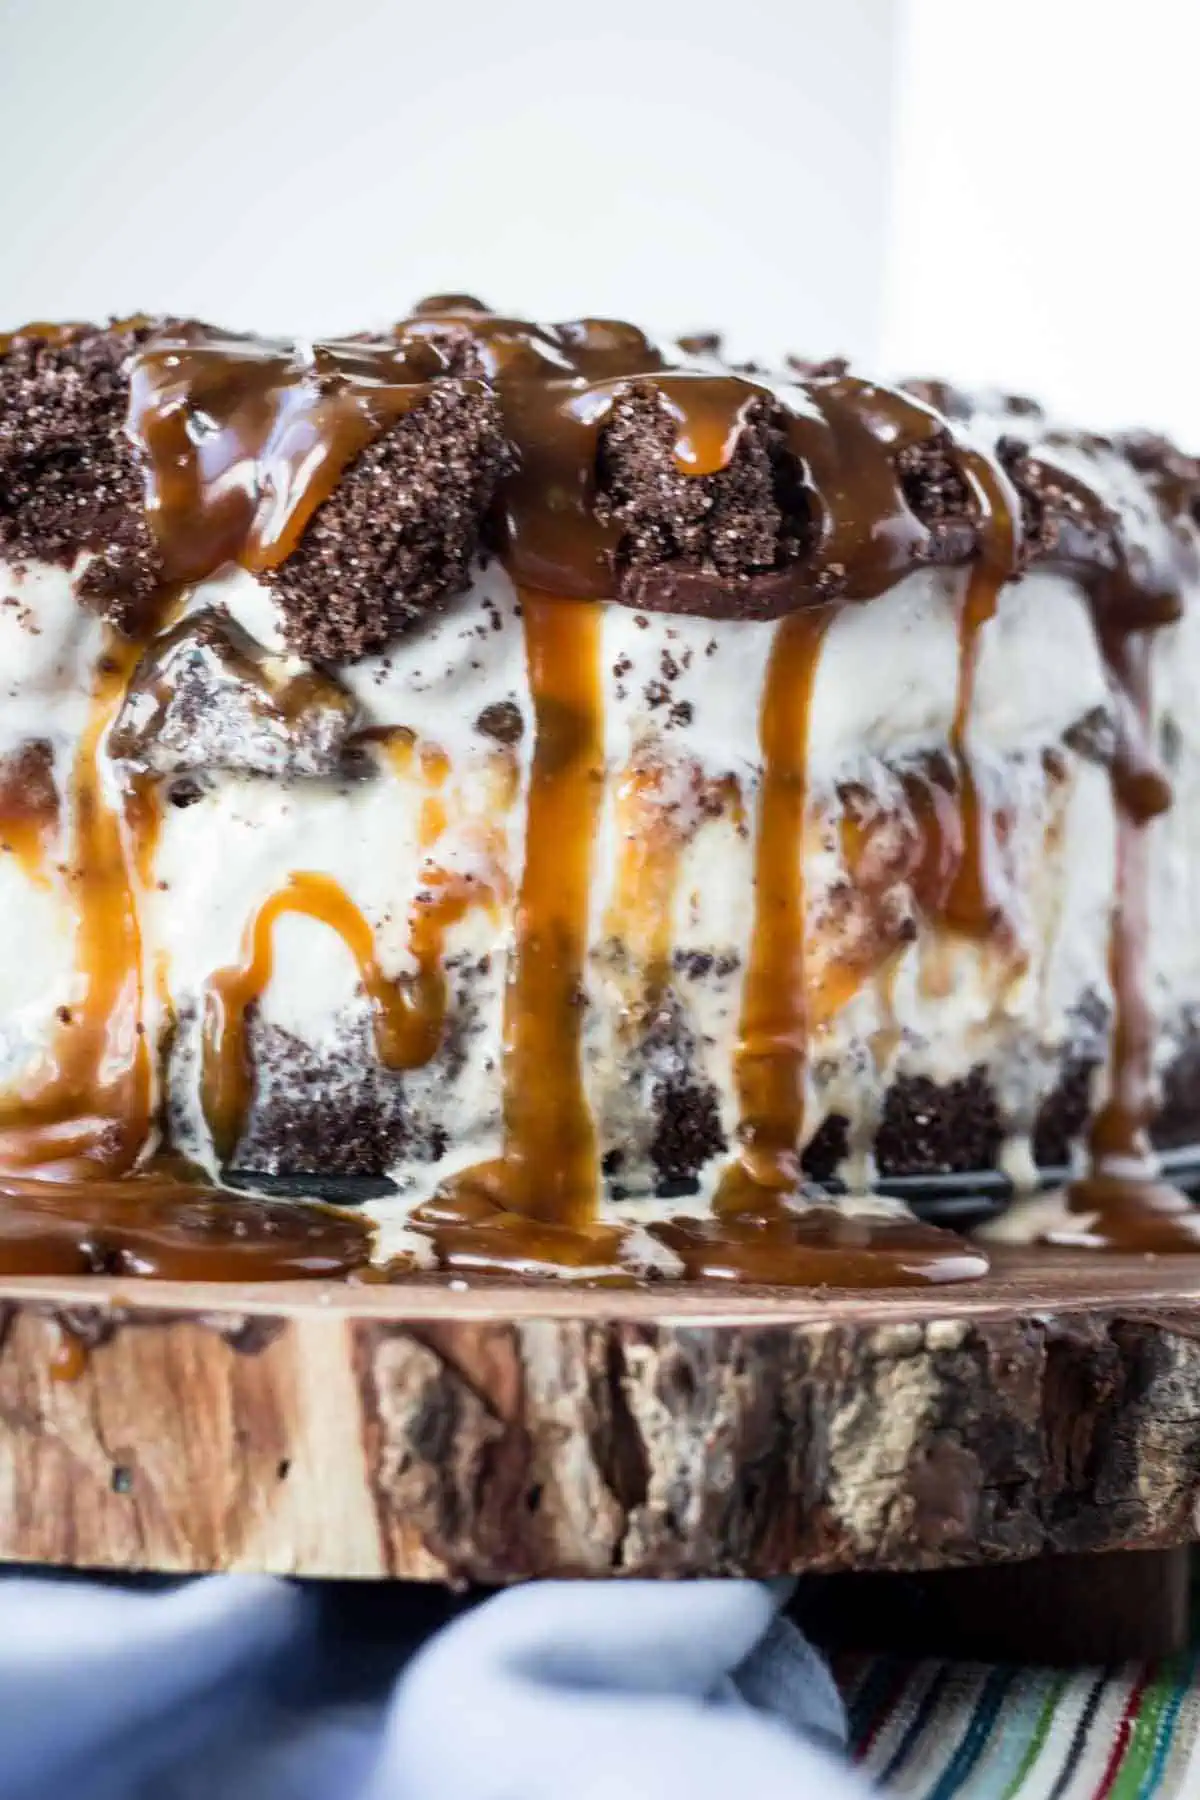 The side of a layered homemade ice cream cake with chocolate and caramel.